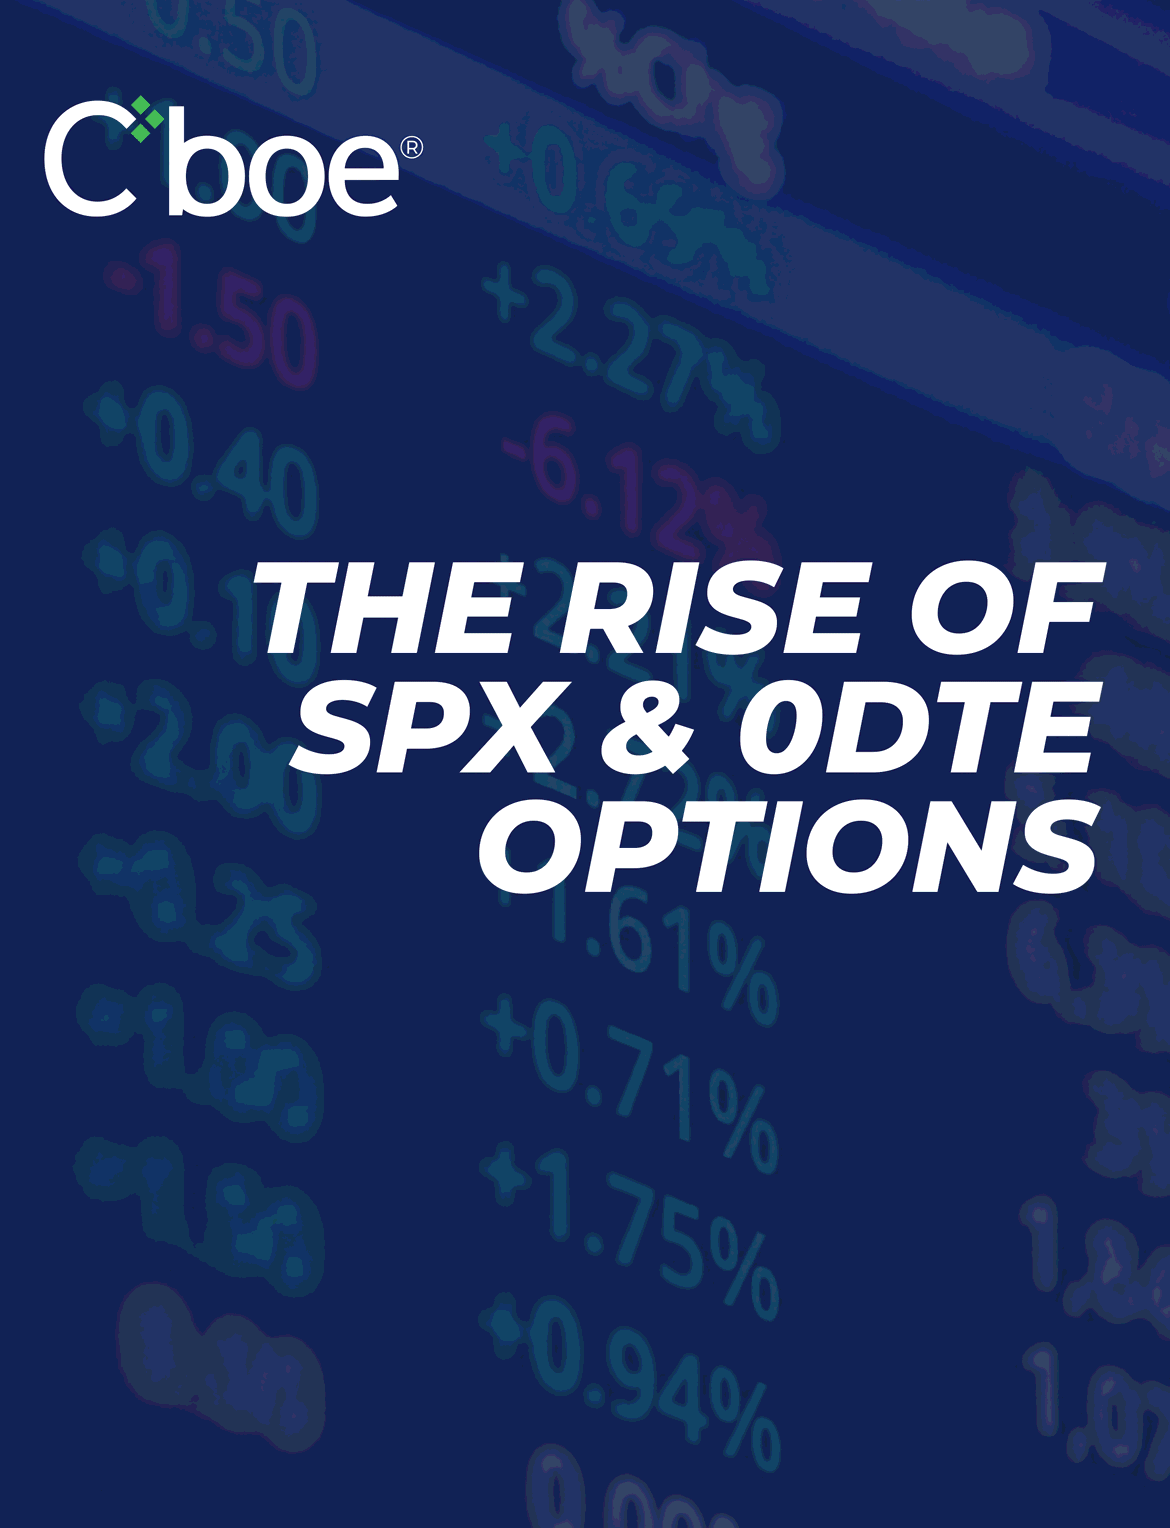 The Rise of SPX & 0DTE Options White Paper